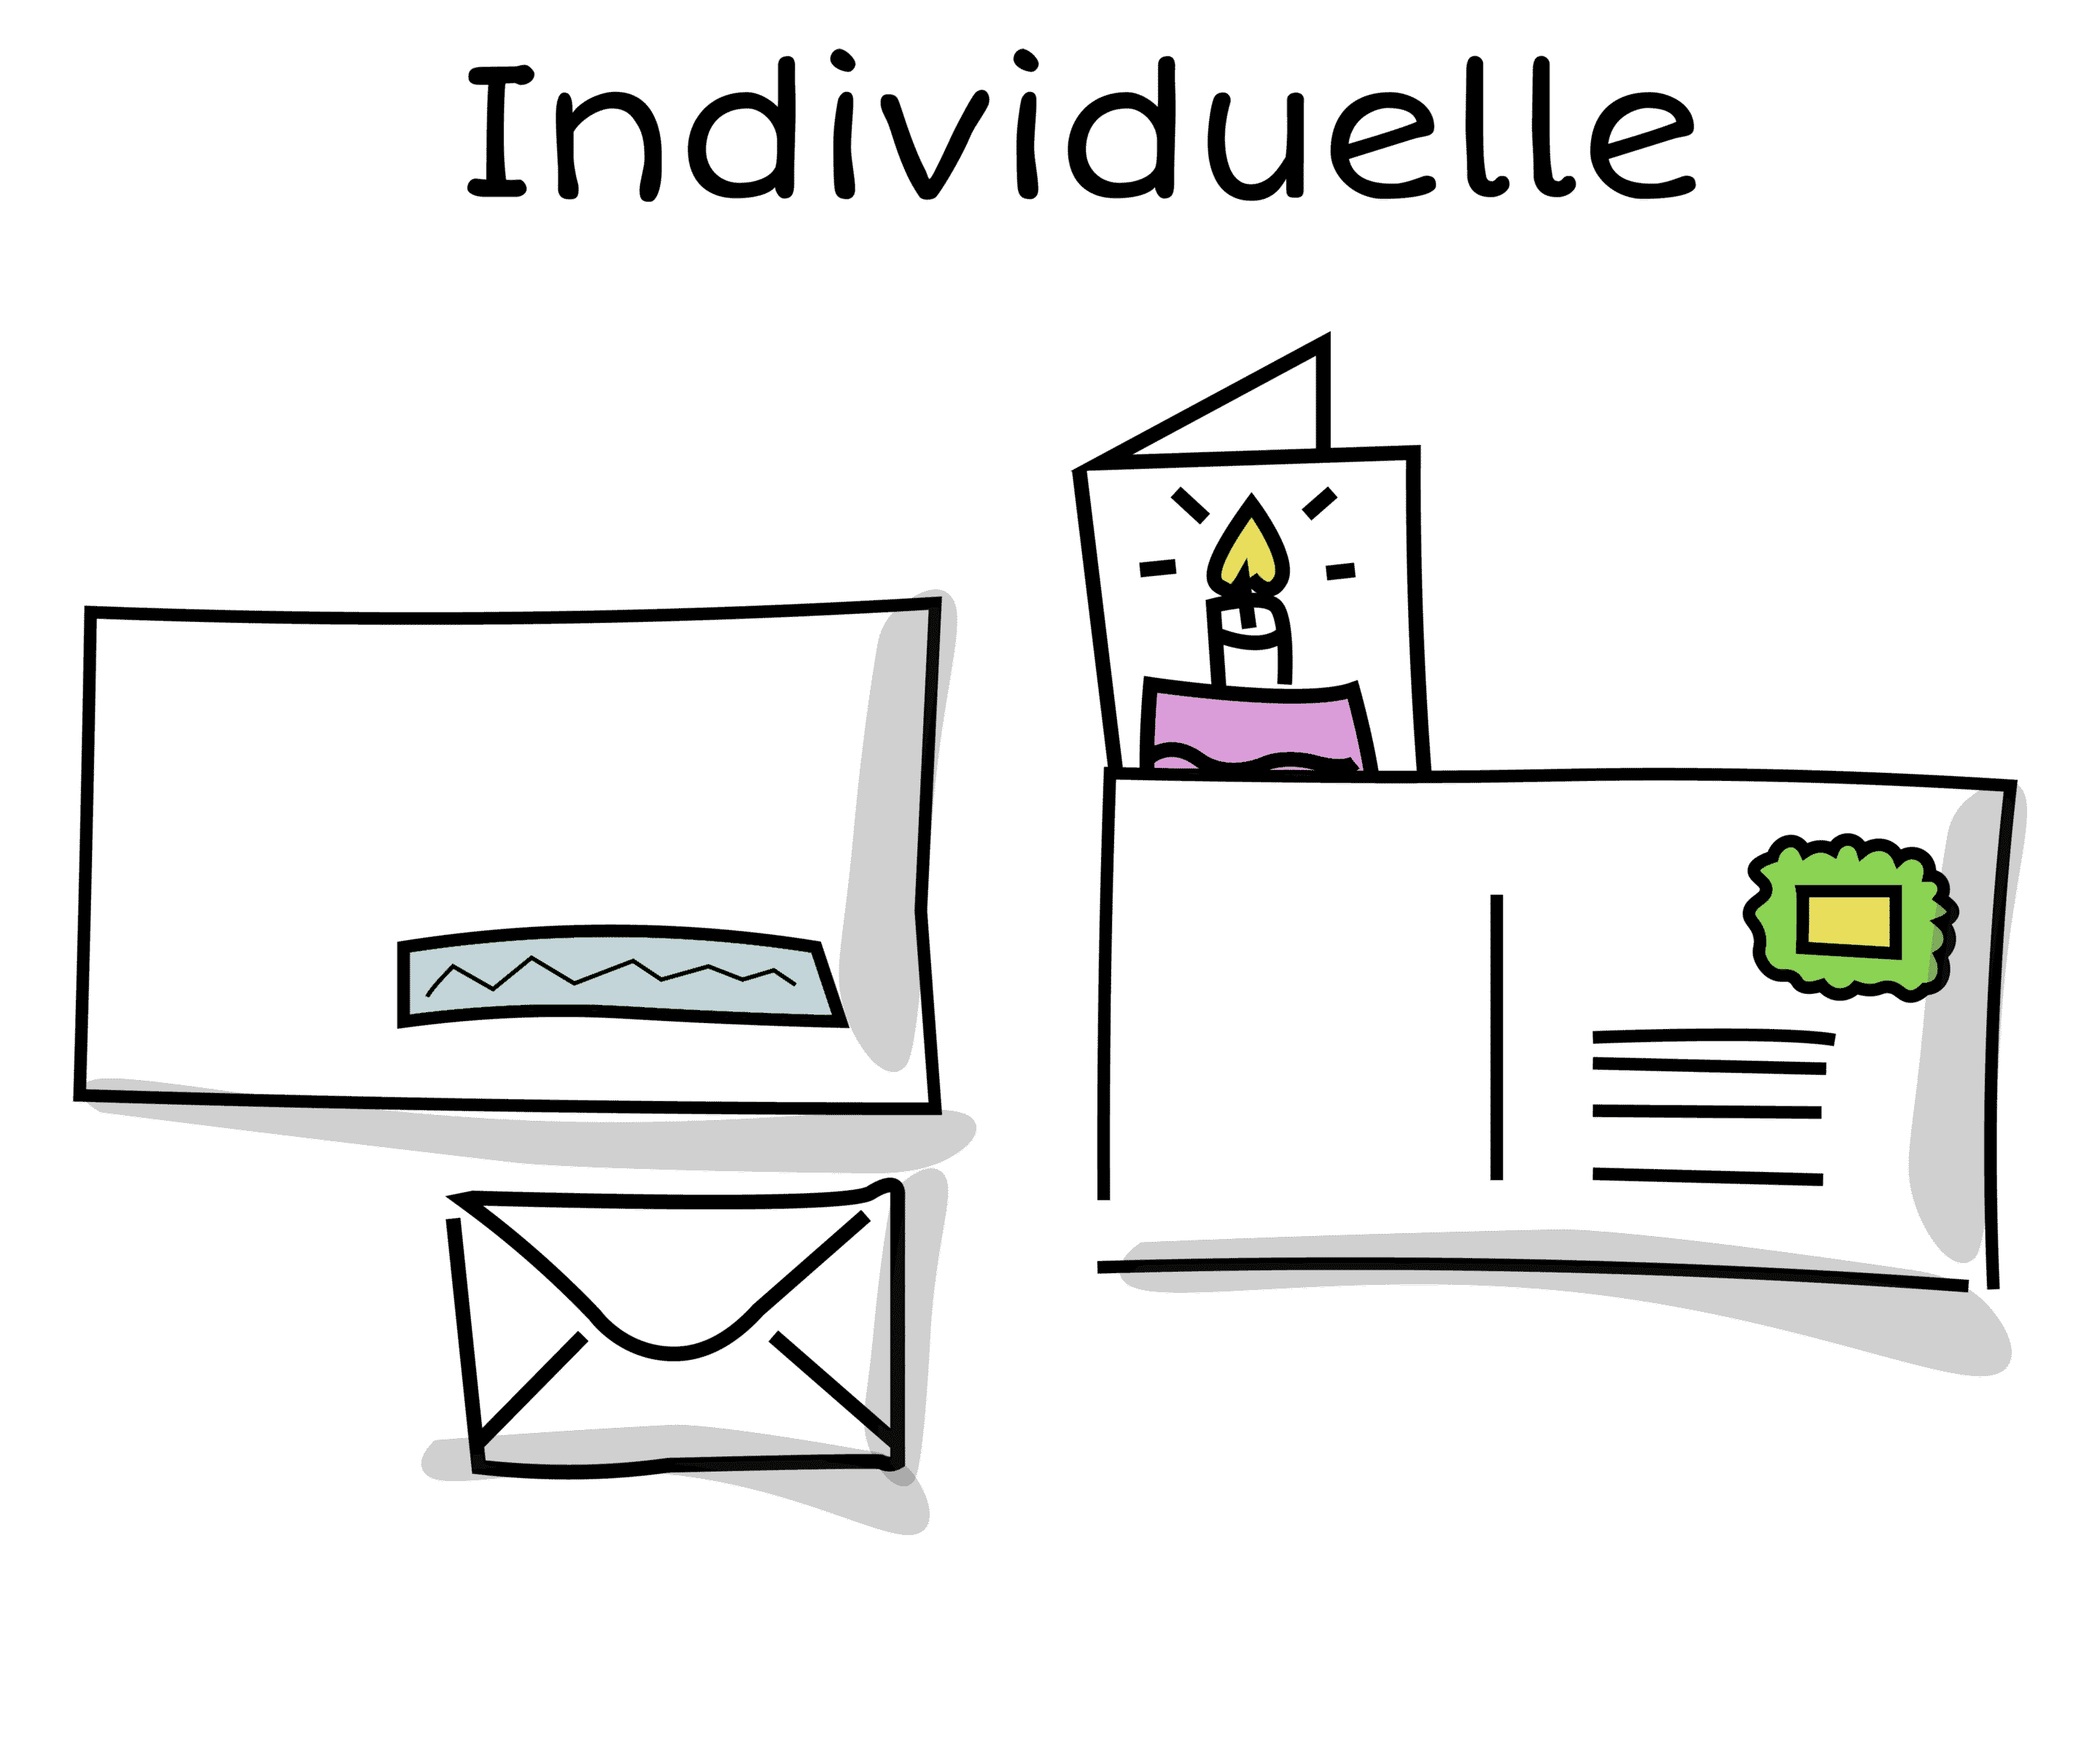 Individuelle.